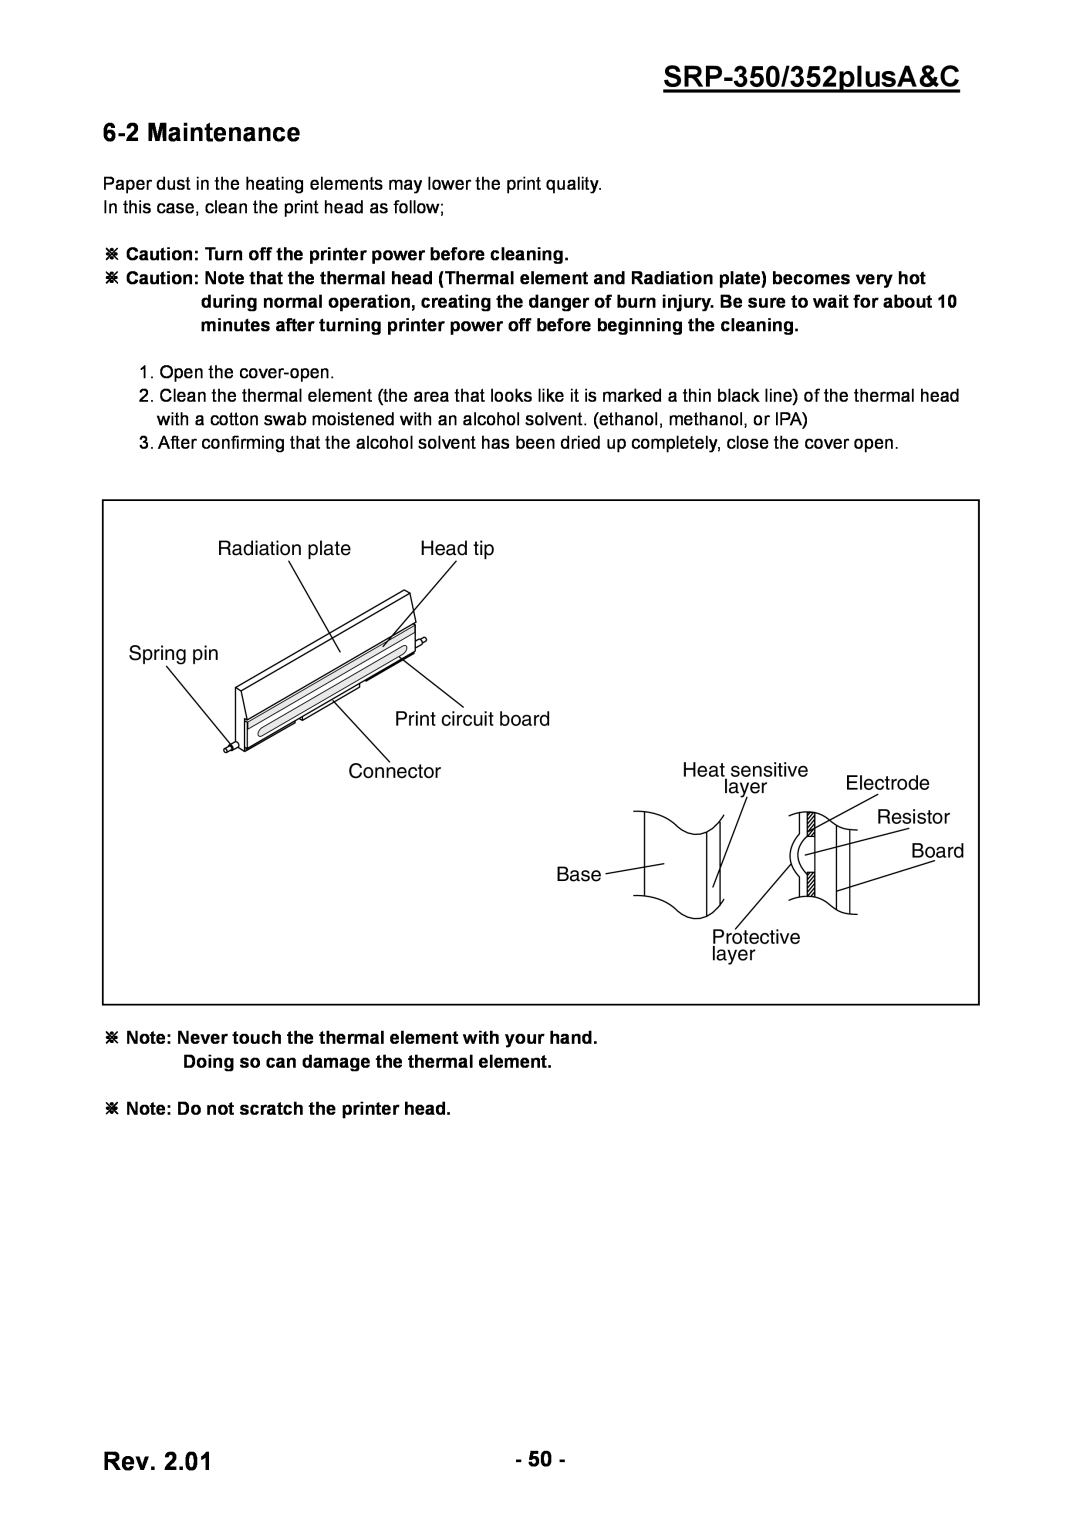 BIXOLON service manual Maintenance, SRP-350/352plusA&C, ※ Caution Turn off the printer power before cleaning 